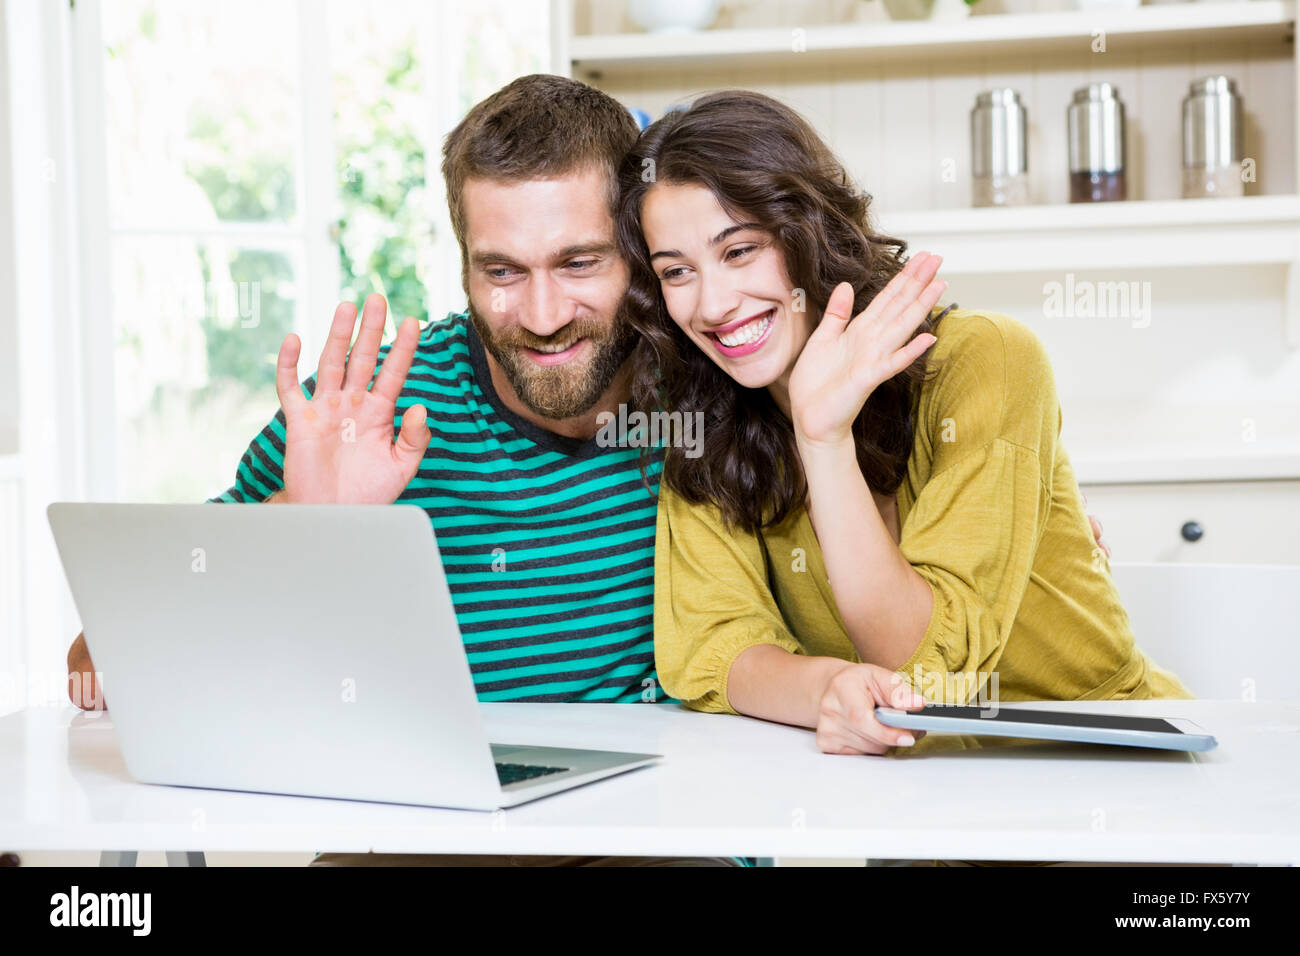 Couple having video chat on laptop Stock Photo